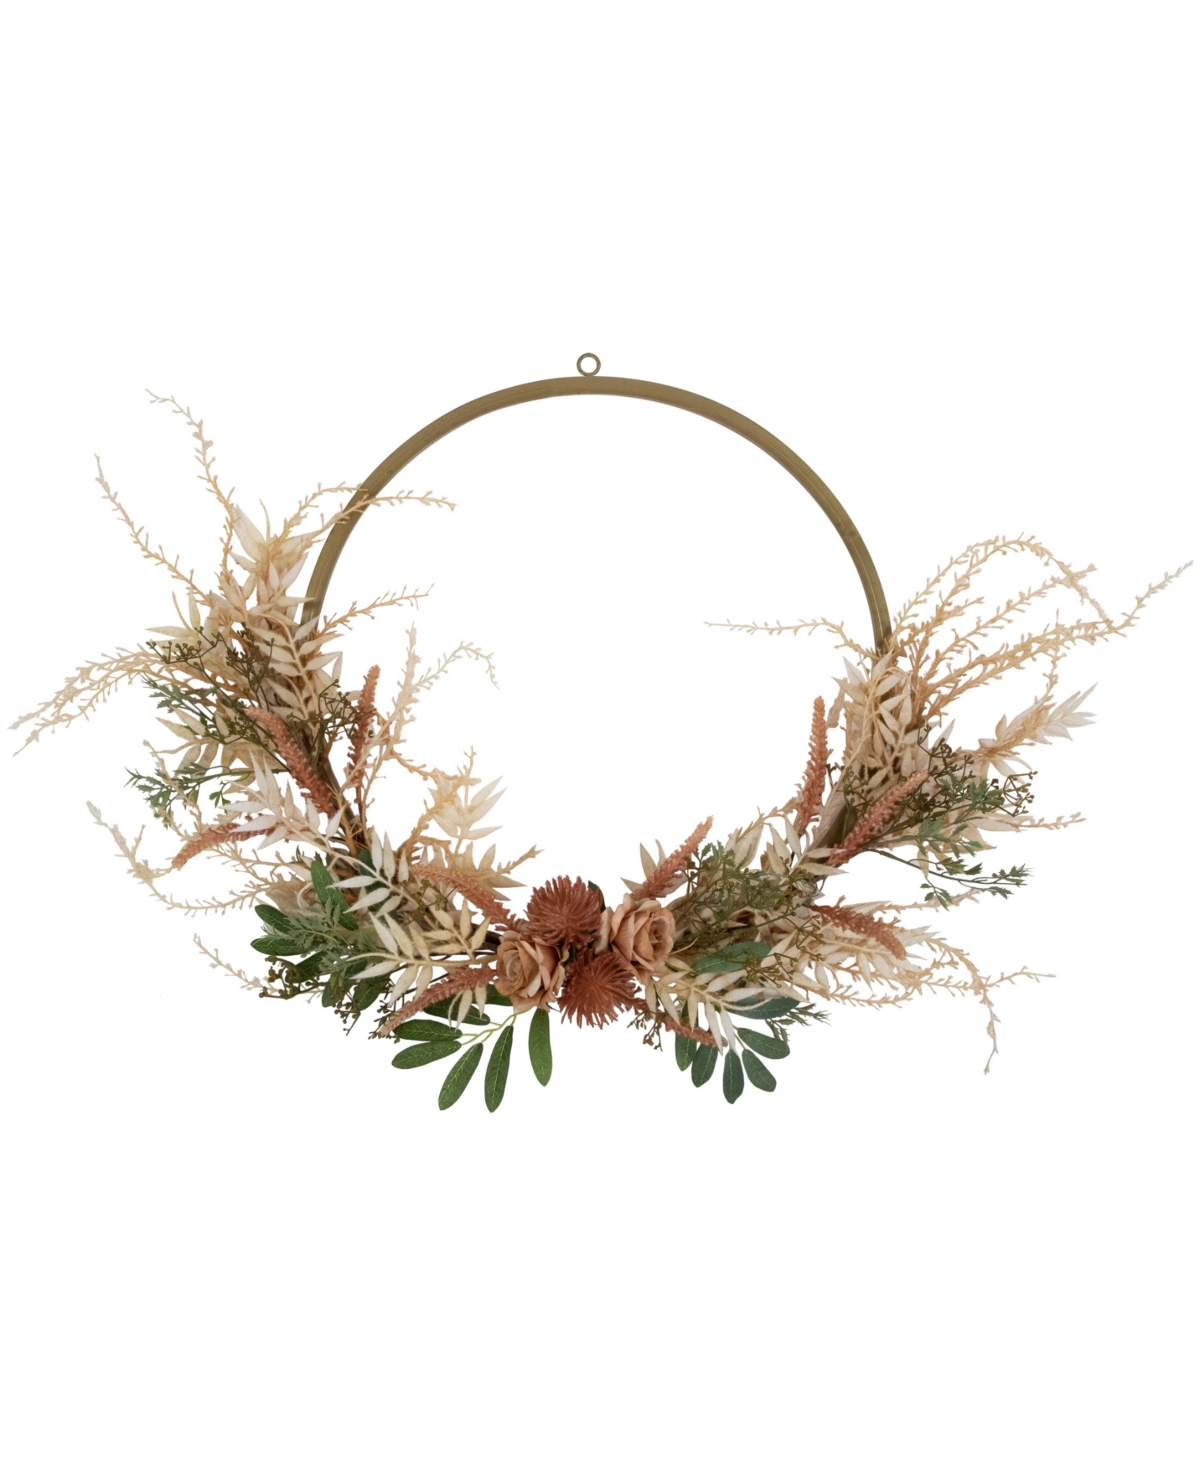 Fall Harvest Pale Roses with Foliage Artificial Wreath 24-Inch Unlit - Brown